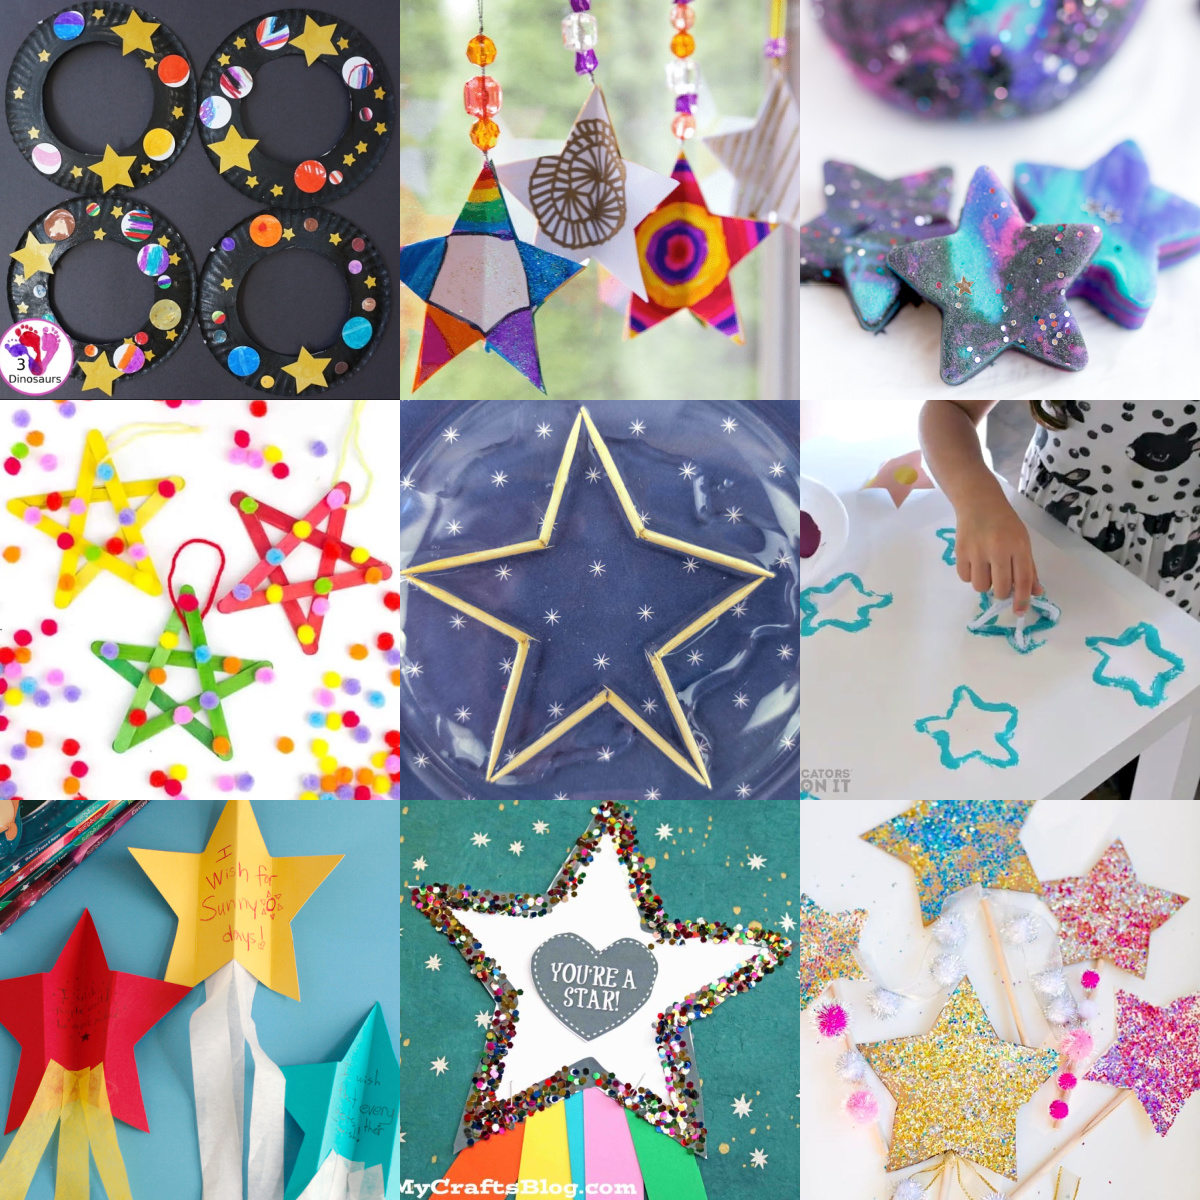 Shine Bright: Star Crafts and Activities for Kids' Delight - DIY Candy